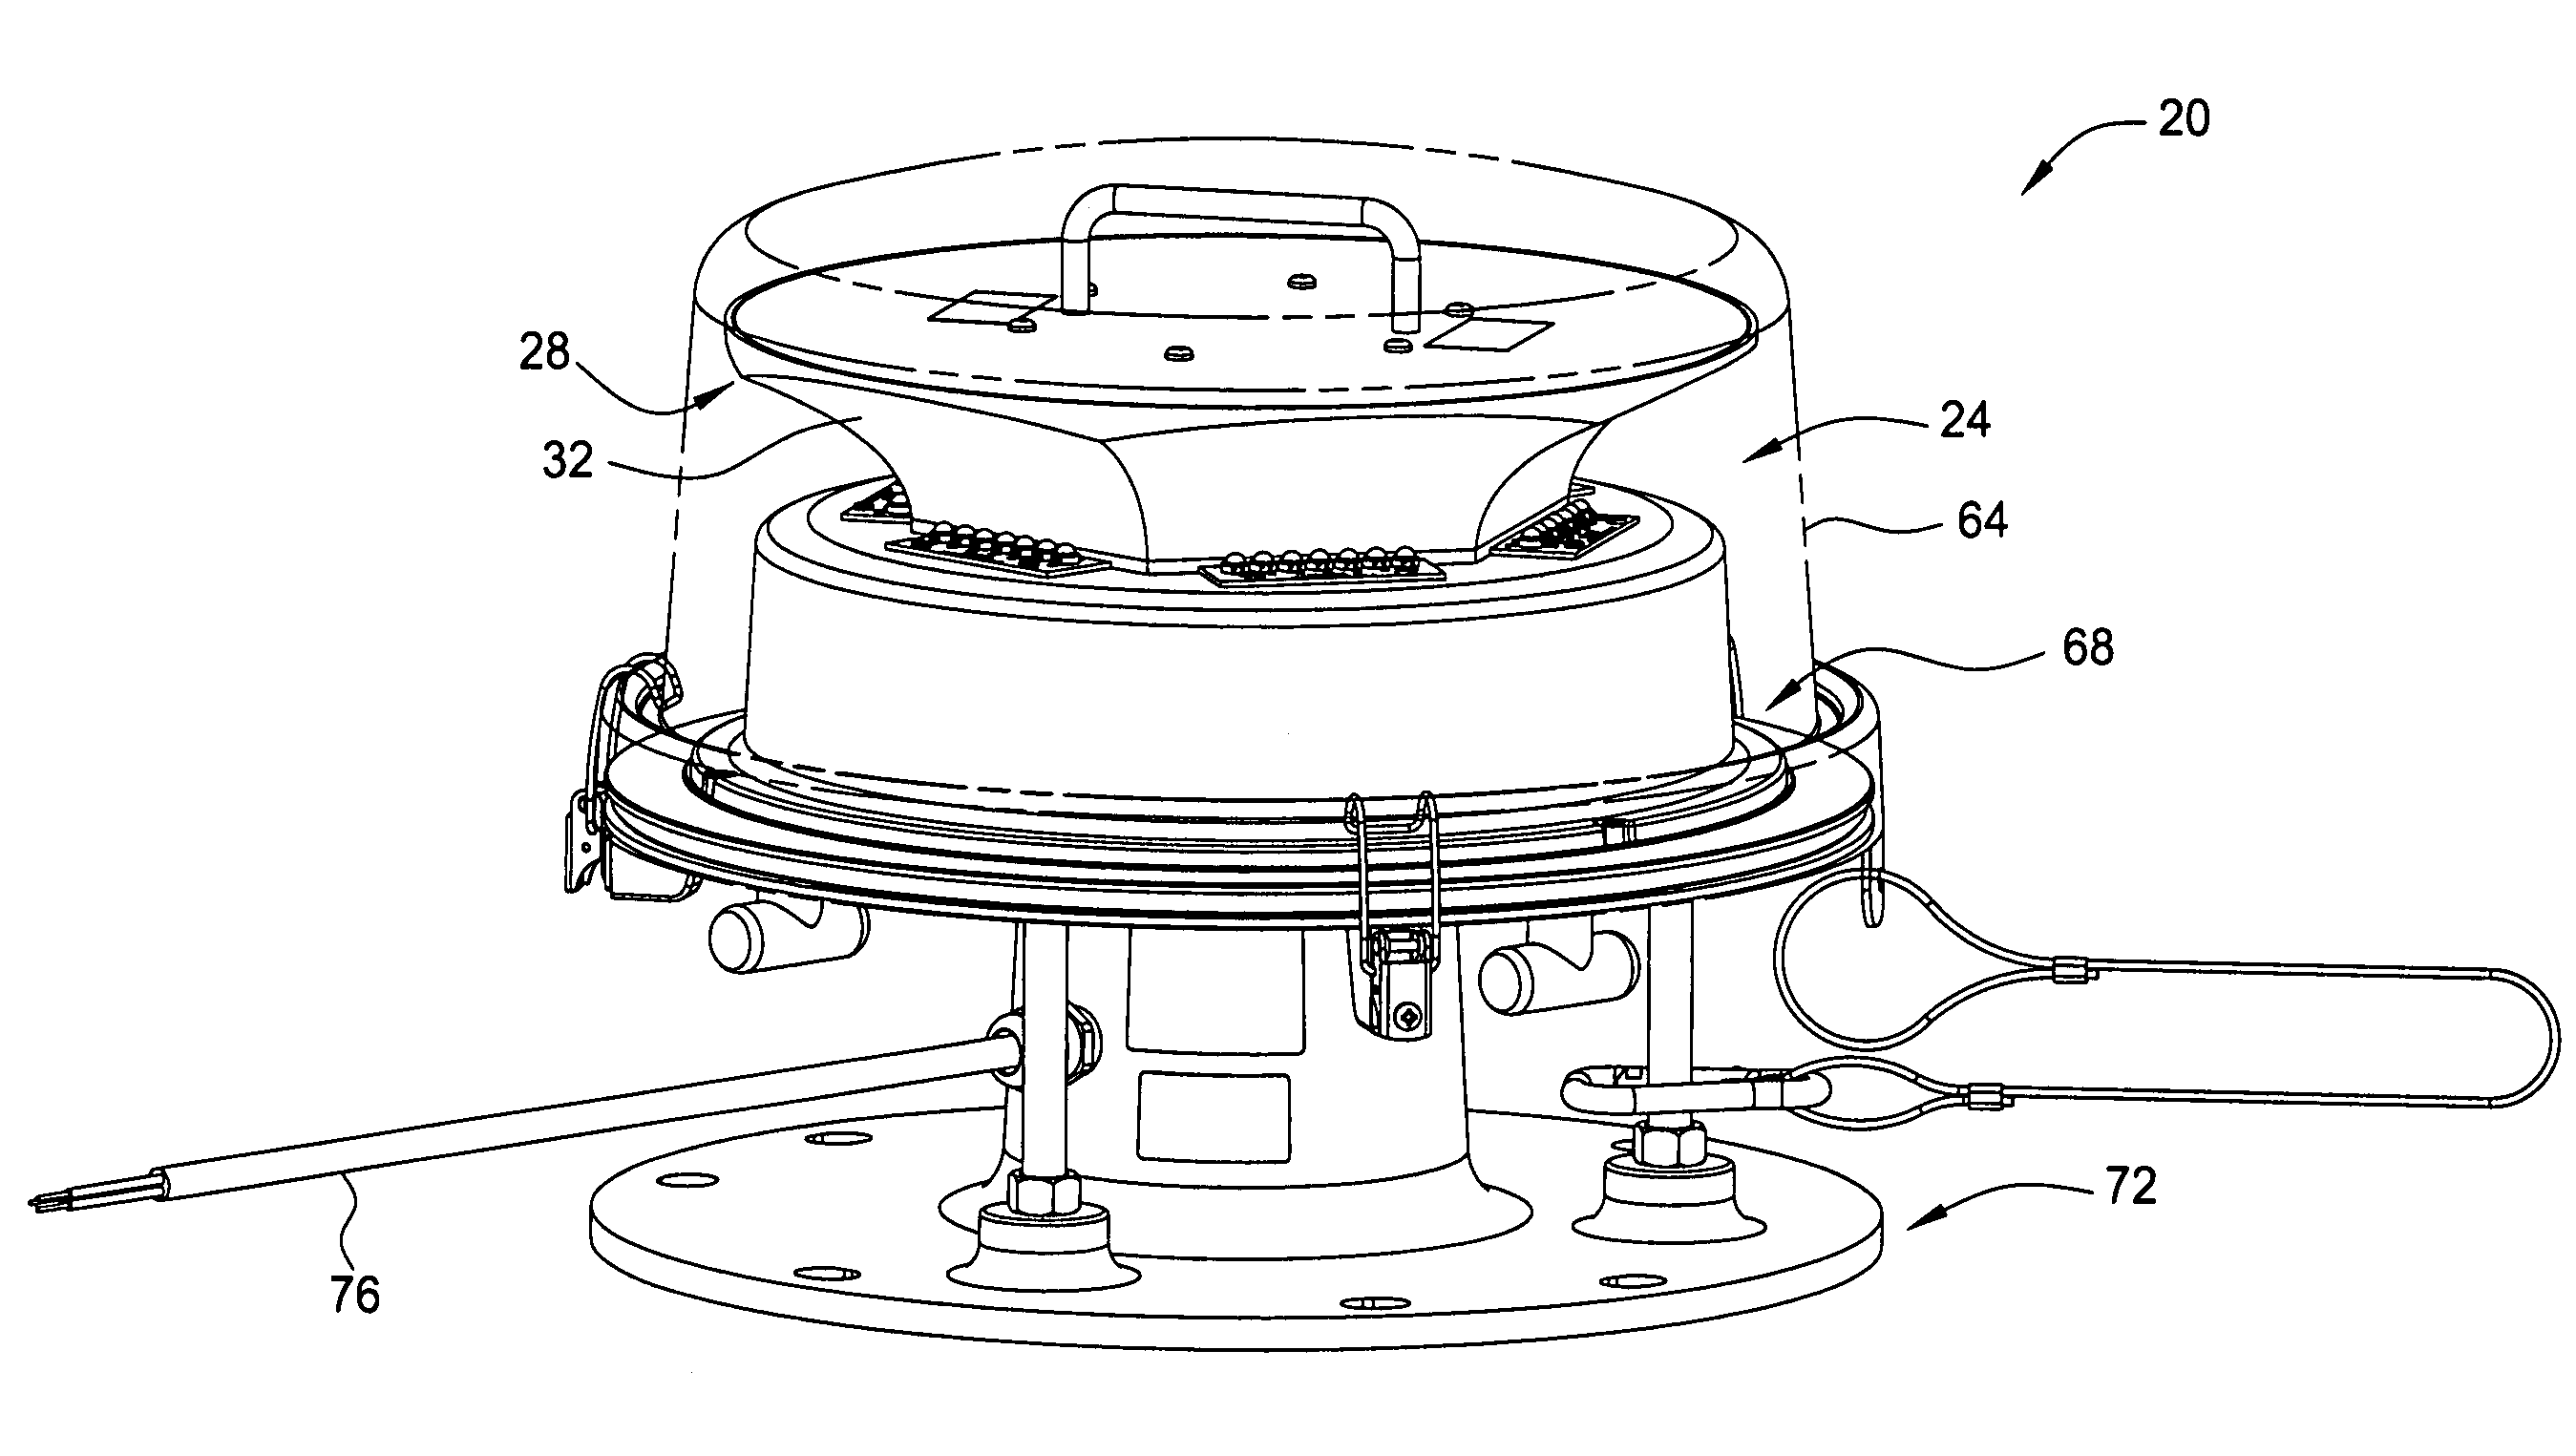 Beacon light with reflector and light-emitting diodes